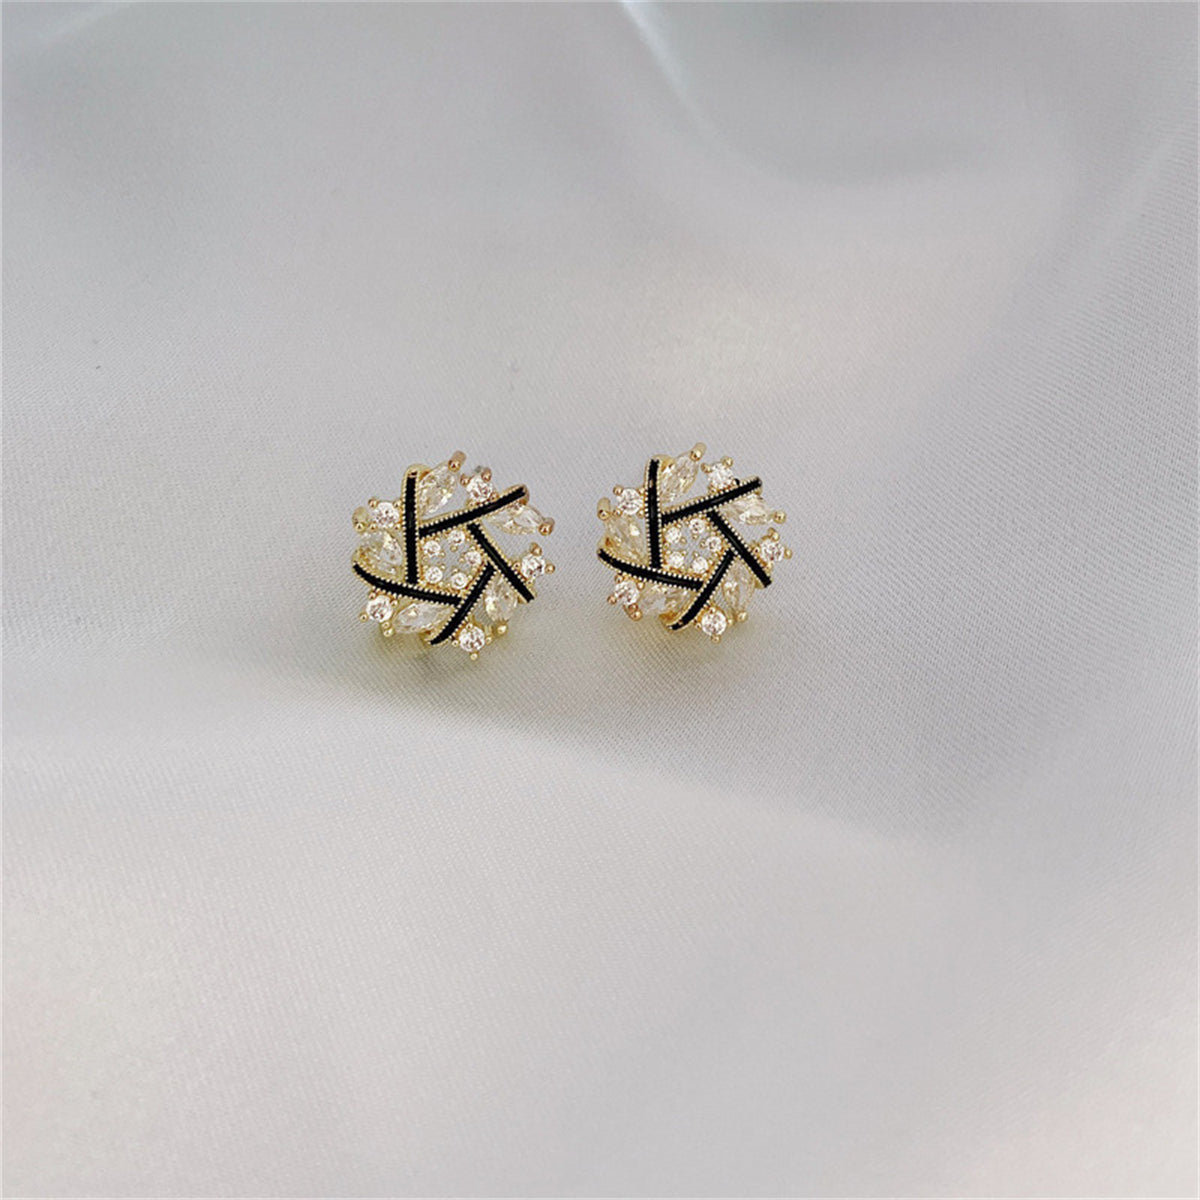 Cubic Zirconia & 18K Gold-Plated Spiral Stud Earrings